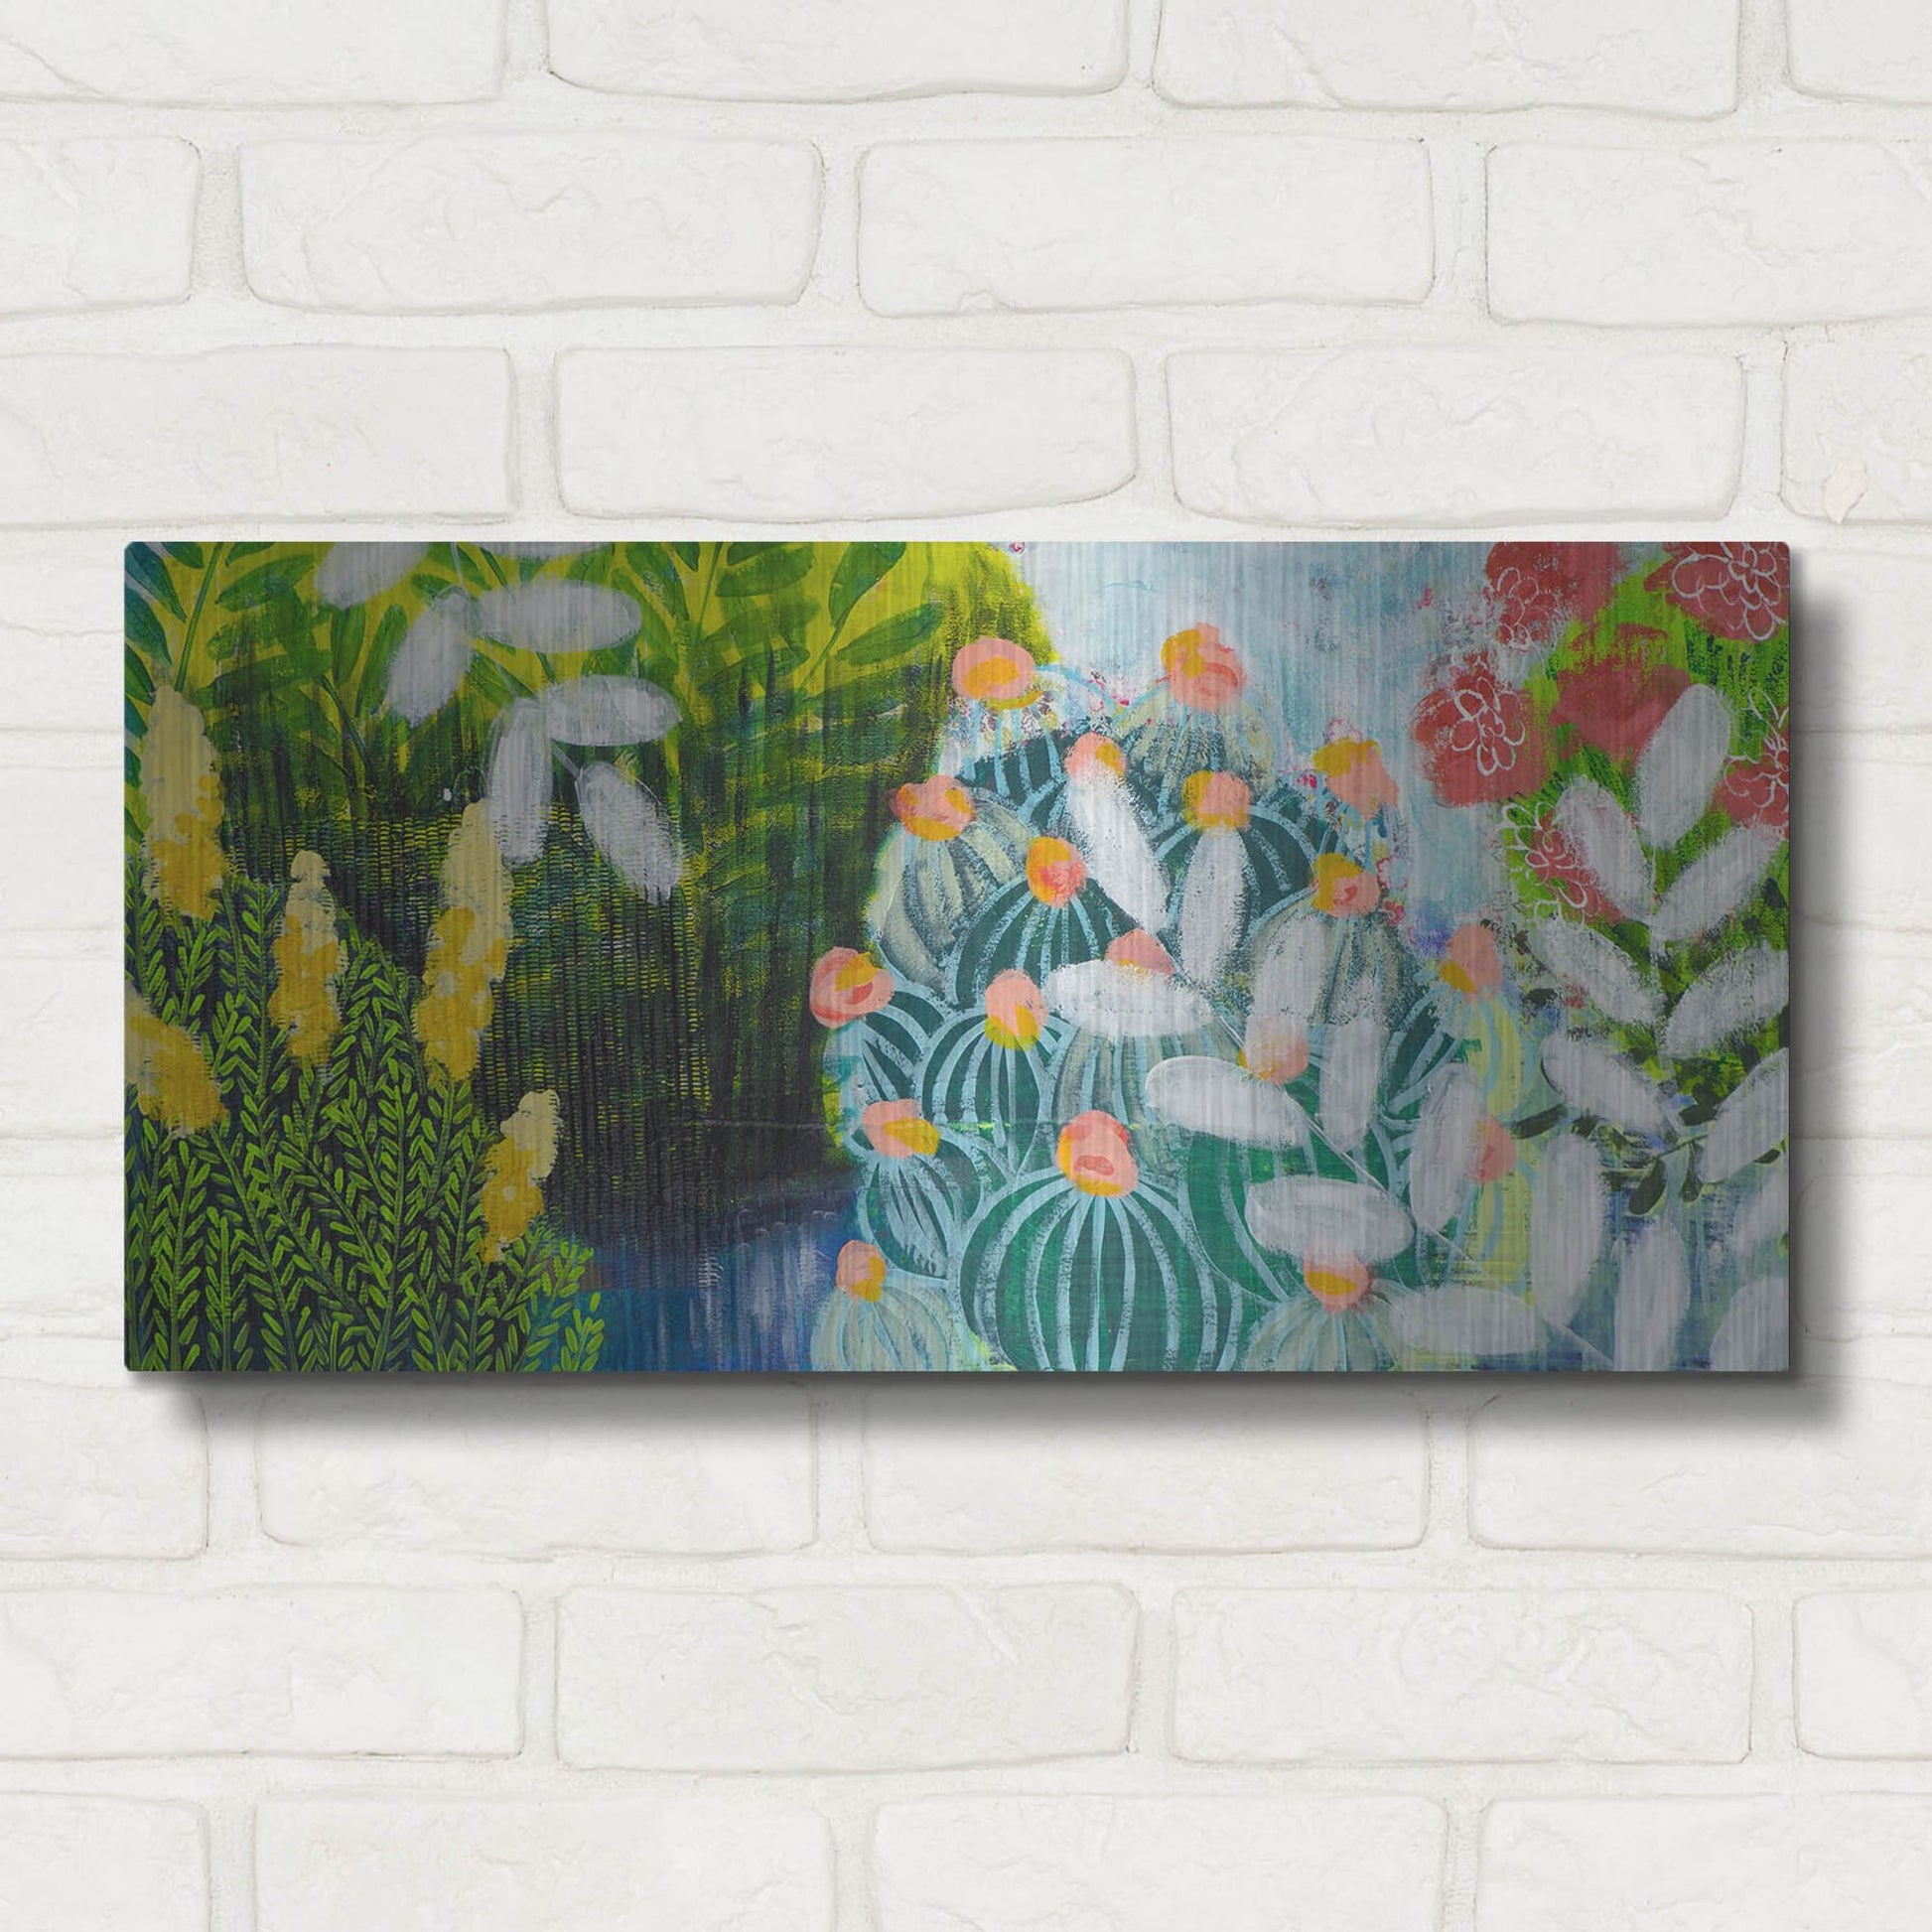 Luxe Metal Art 'Botanical Visions' by Shelley Hampe, Metal Wall Art,24x12